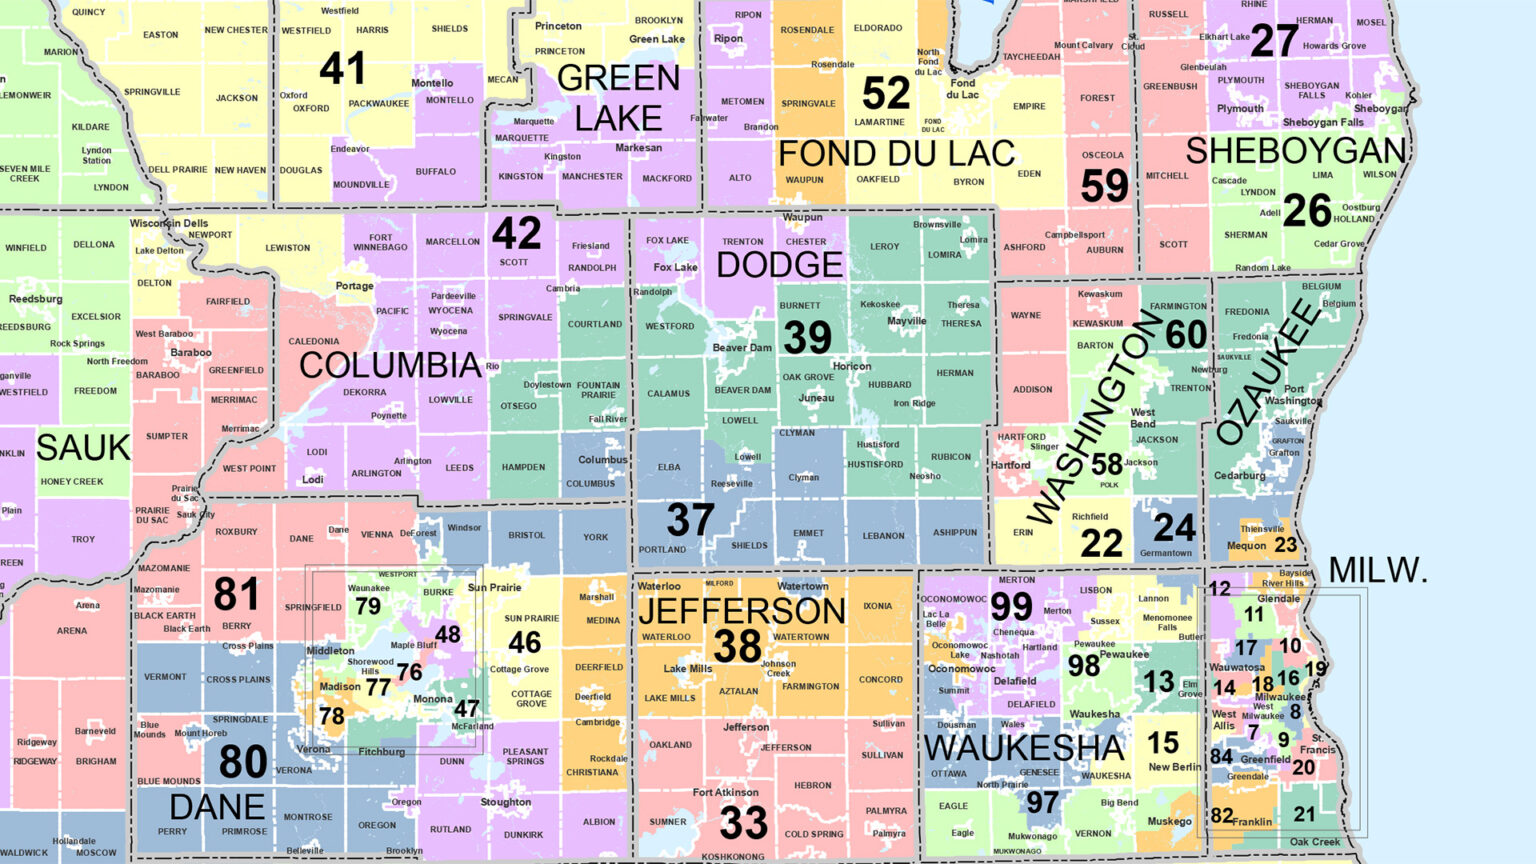 A portion of a map shows the outlines and municipalities included in Wisconsin Assembly districts in east central regions of the state.